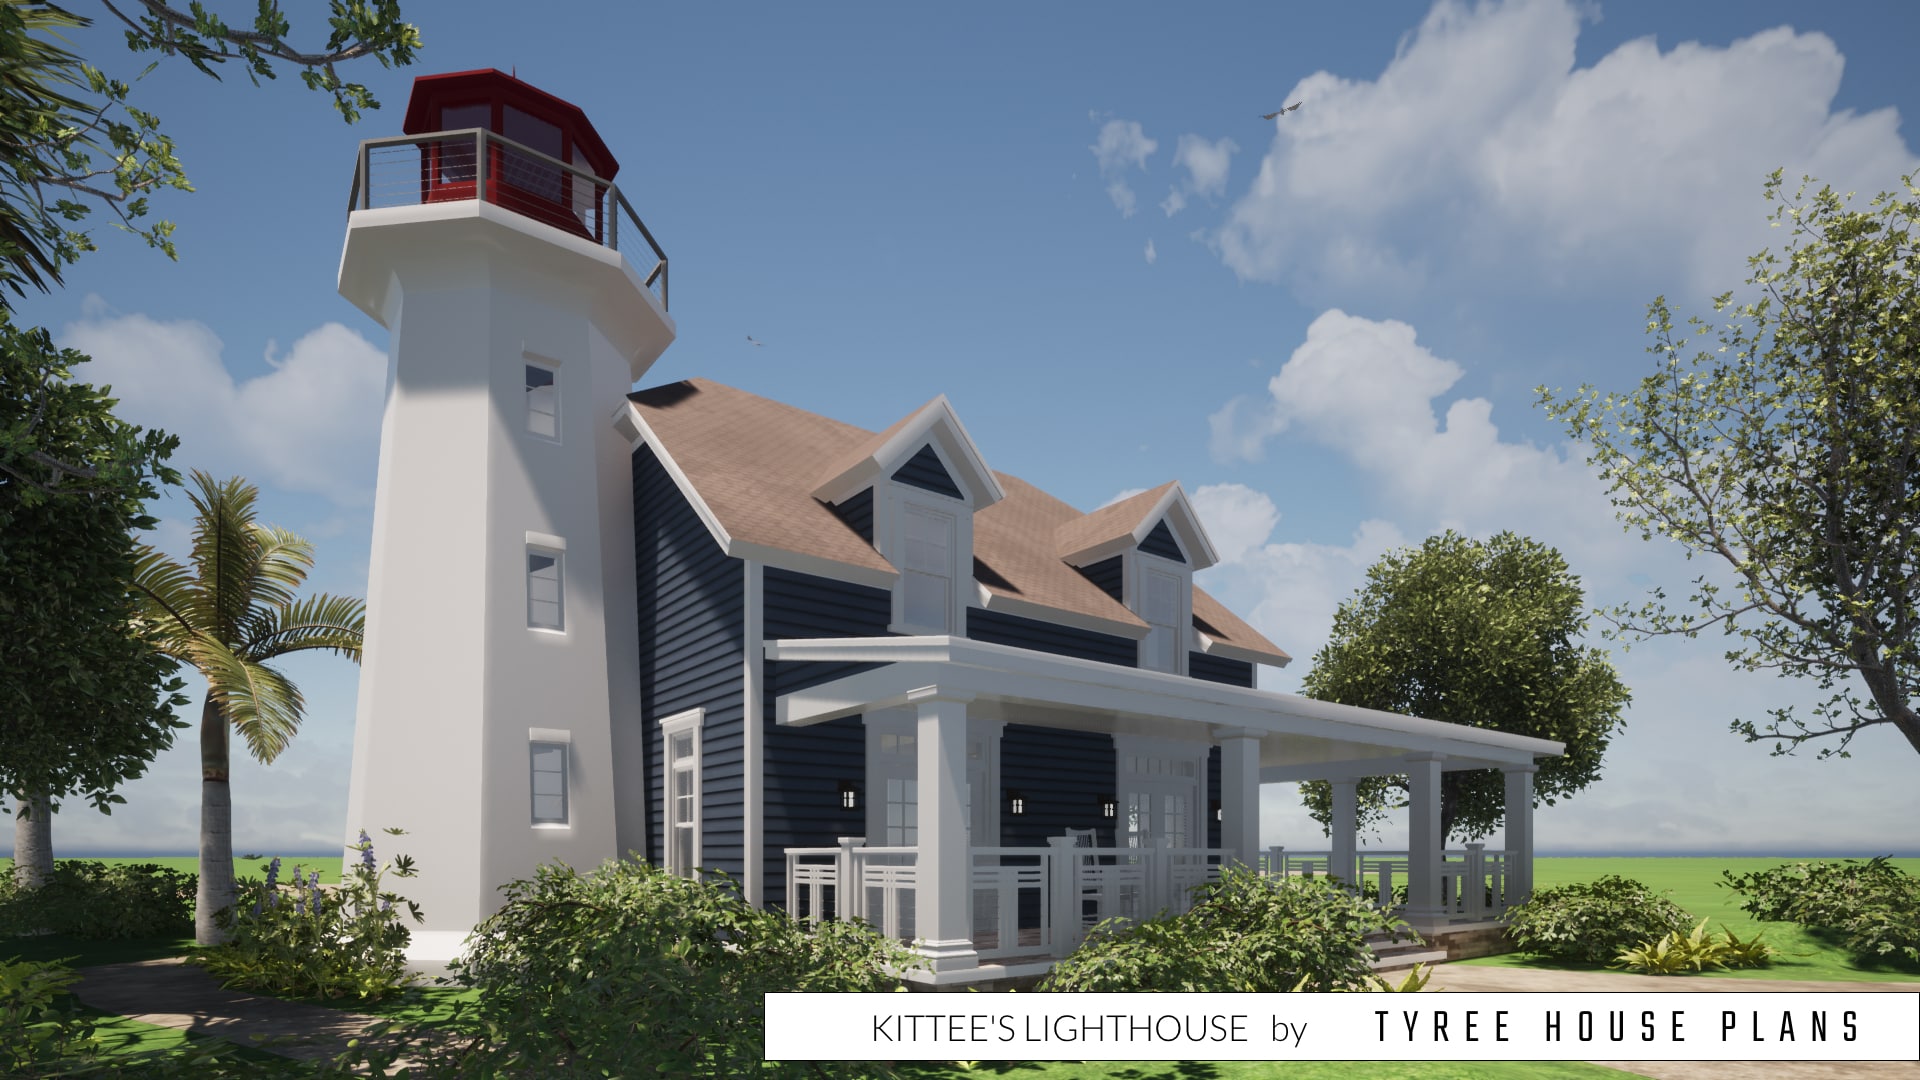 Kittee's Lighthouse Plan by Tyree House Plans